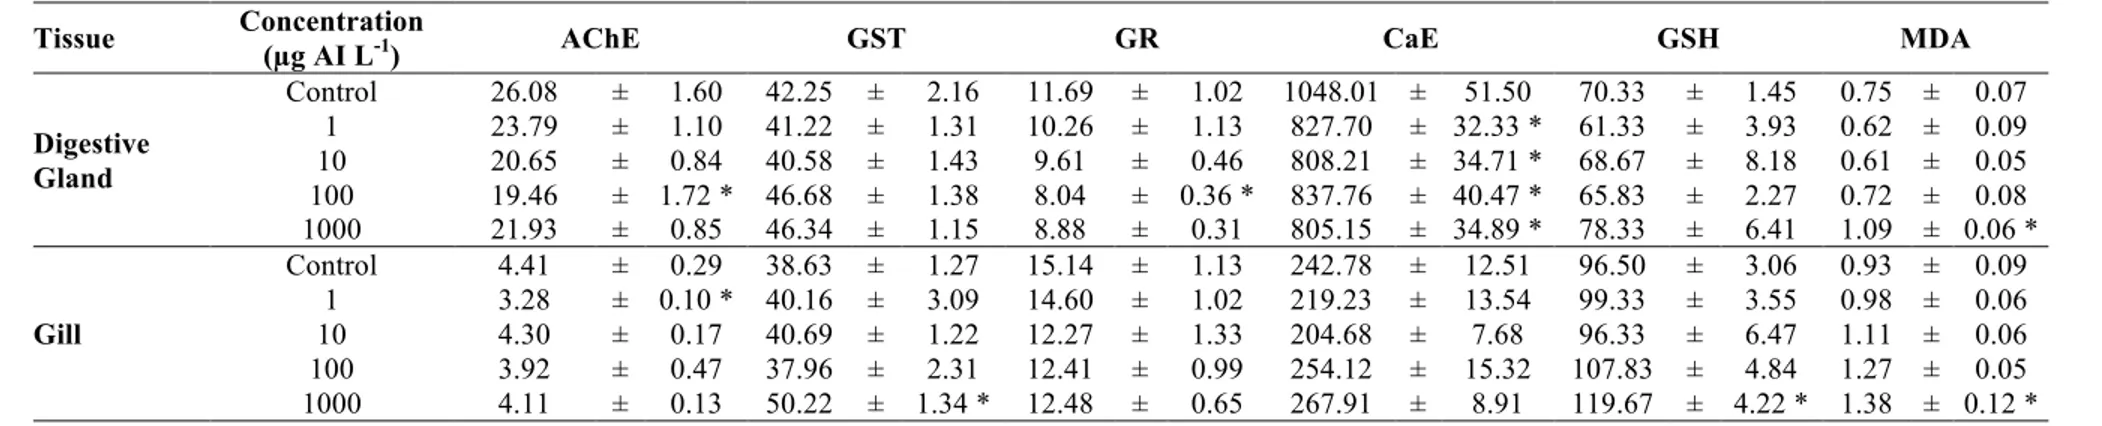 Table 4. The biochemical response in digestive gland and gill of freshwater mussels after 96 h imidacloprid exposure (Enzyme activities expressed as nmol/min/mg  protein ± mean standard error